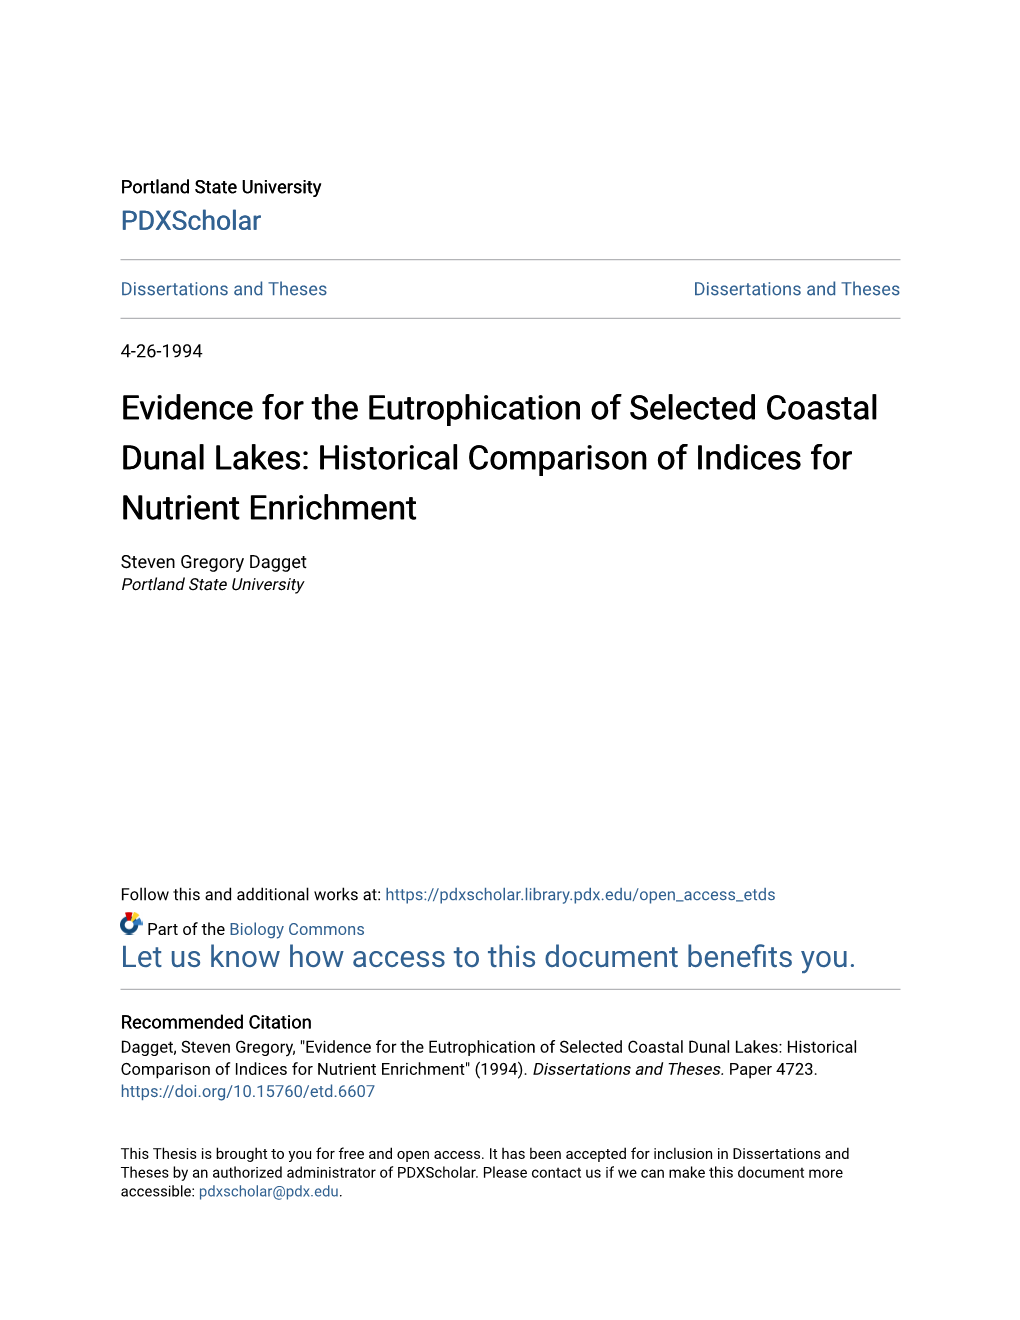 Evidence for the Eutrophication of Selected Coastal Dunal Lakes: Historical Comparison of Indices for Nutrient Enrichment